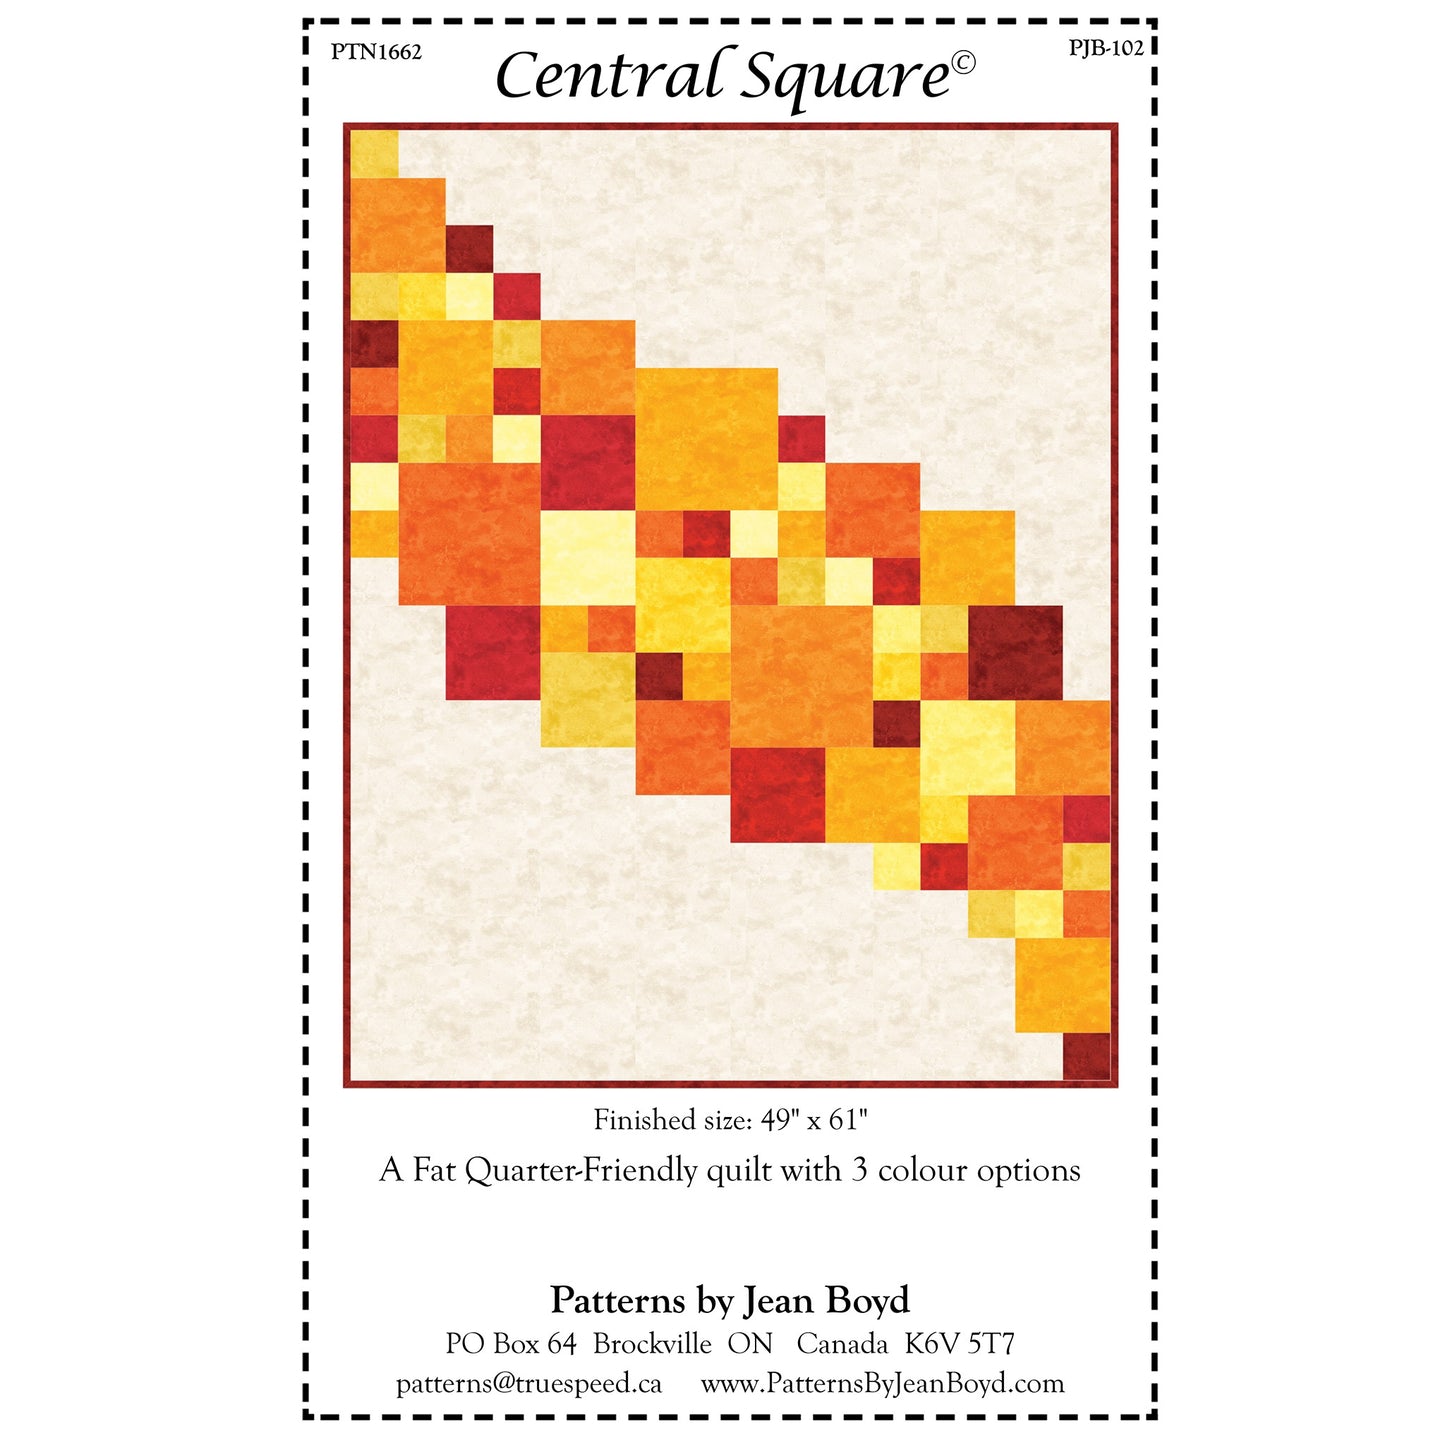 Cover image of pattern for Central Square Quilt.